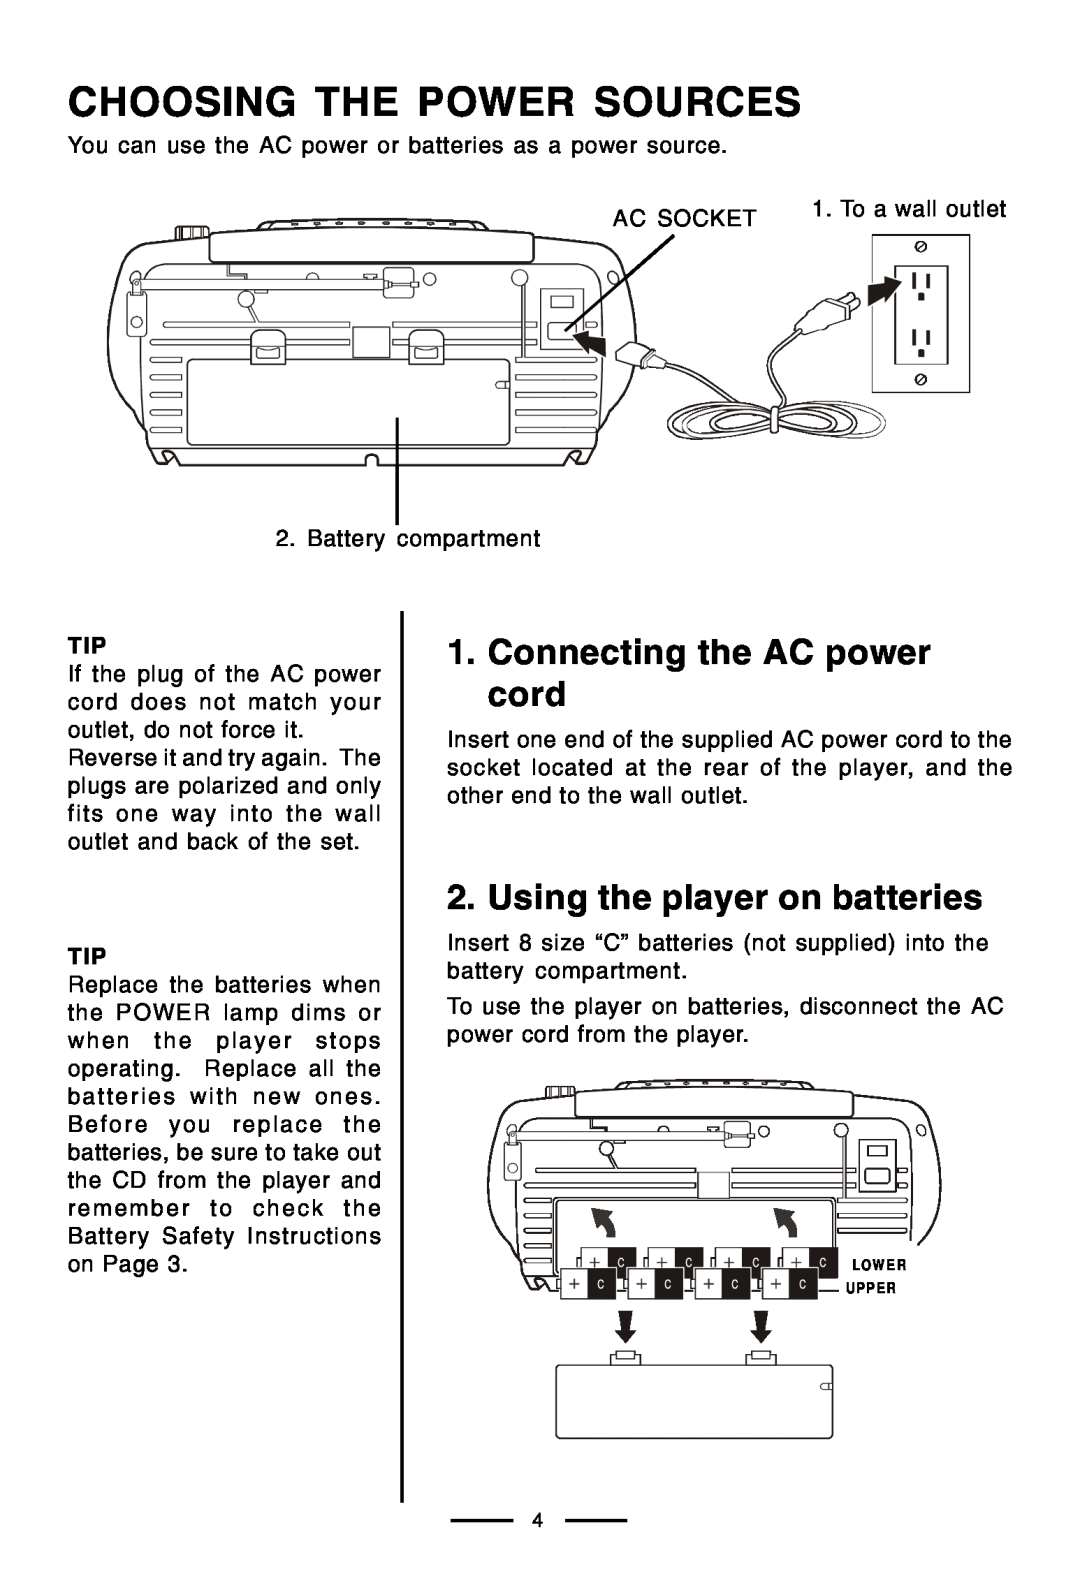 Lenoxx Electronics CD-210 manual Choosing The Power Sources, Connecting the AC power cord, Using the player on batteries 